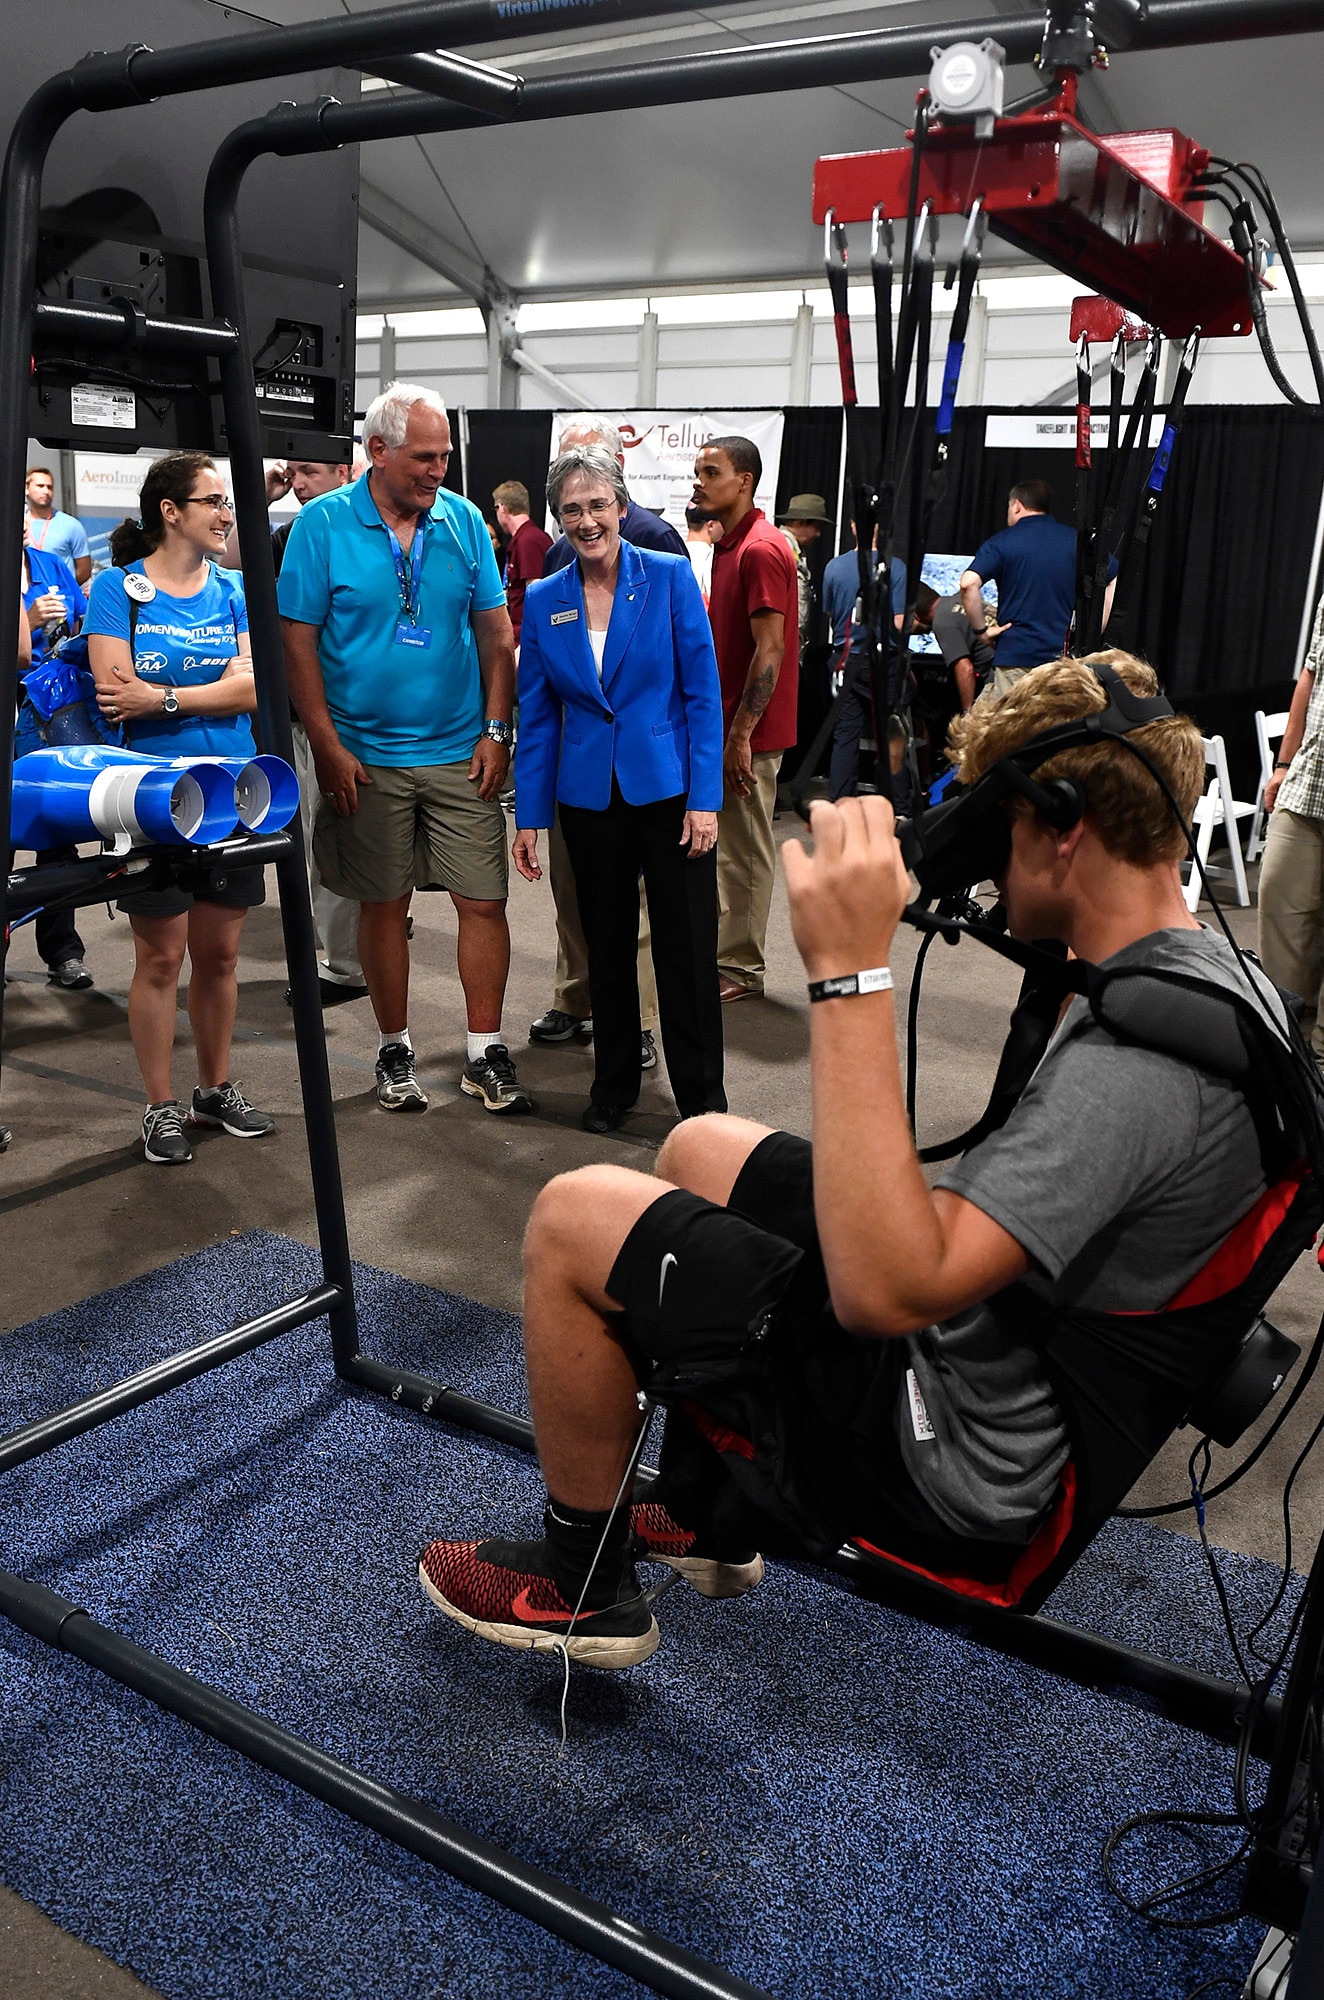 Secretary of the Air Force Heather Wilson learns about innovative development using virtual reality during the Experimental Aircraft Association's AirVenture 2017 in Oshkosh, Wisc., July 26, 2017. (U.S. Air Force photo/Scott M. Ash)